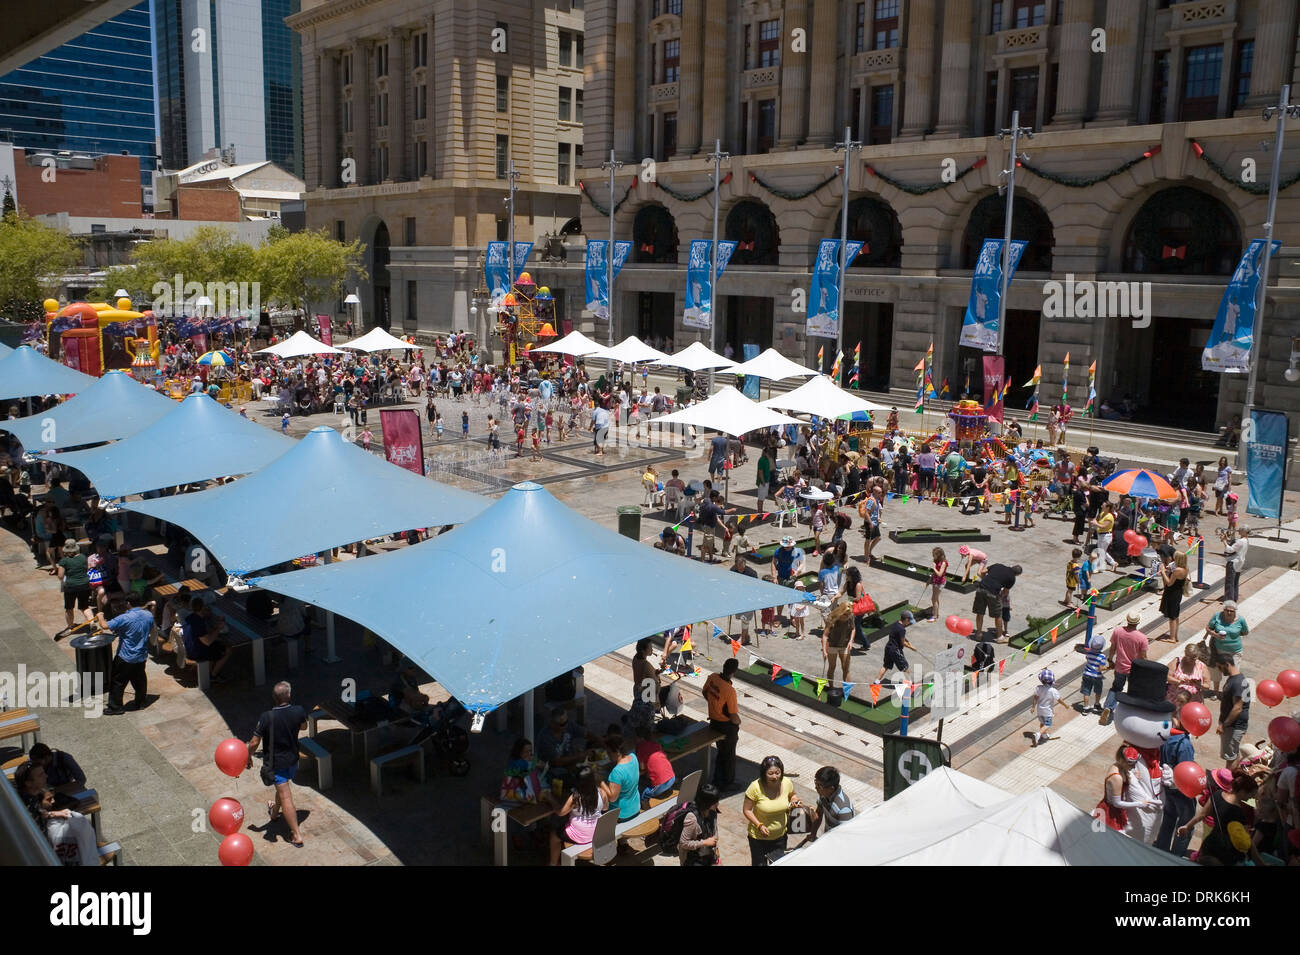 Family fun day around Christmas time in Forrest Place, city centre of Perth, Western Australia. Stock Photo